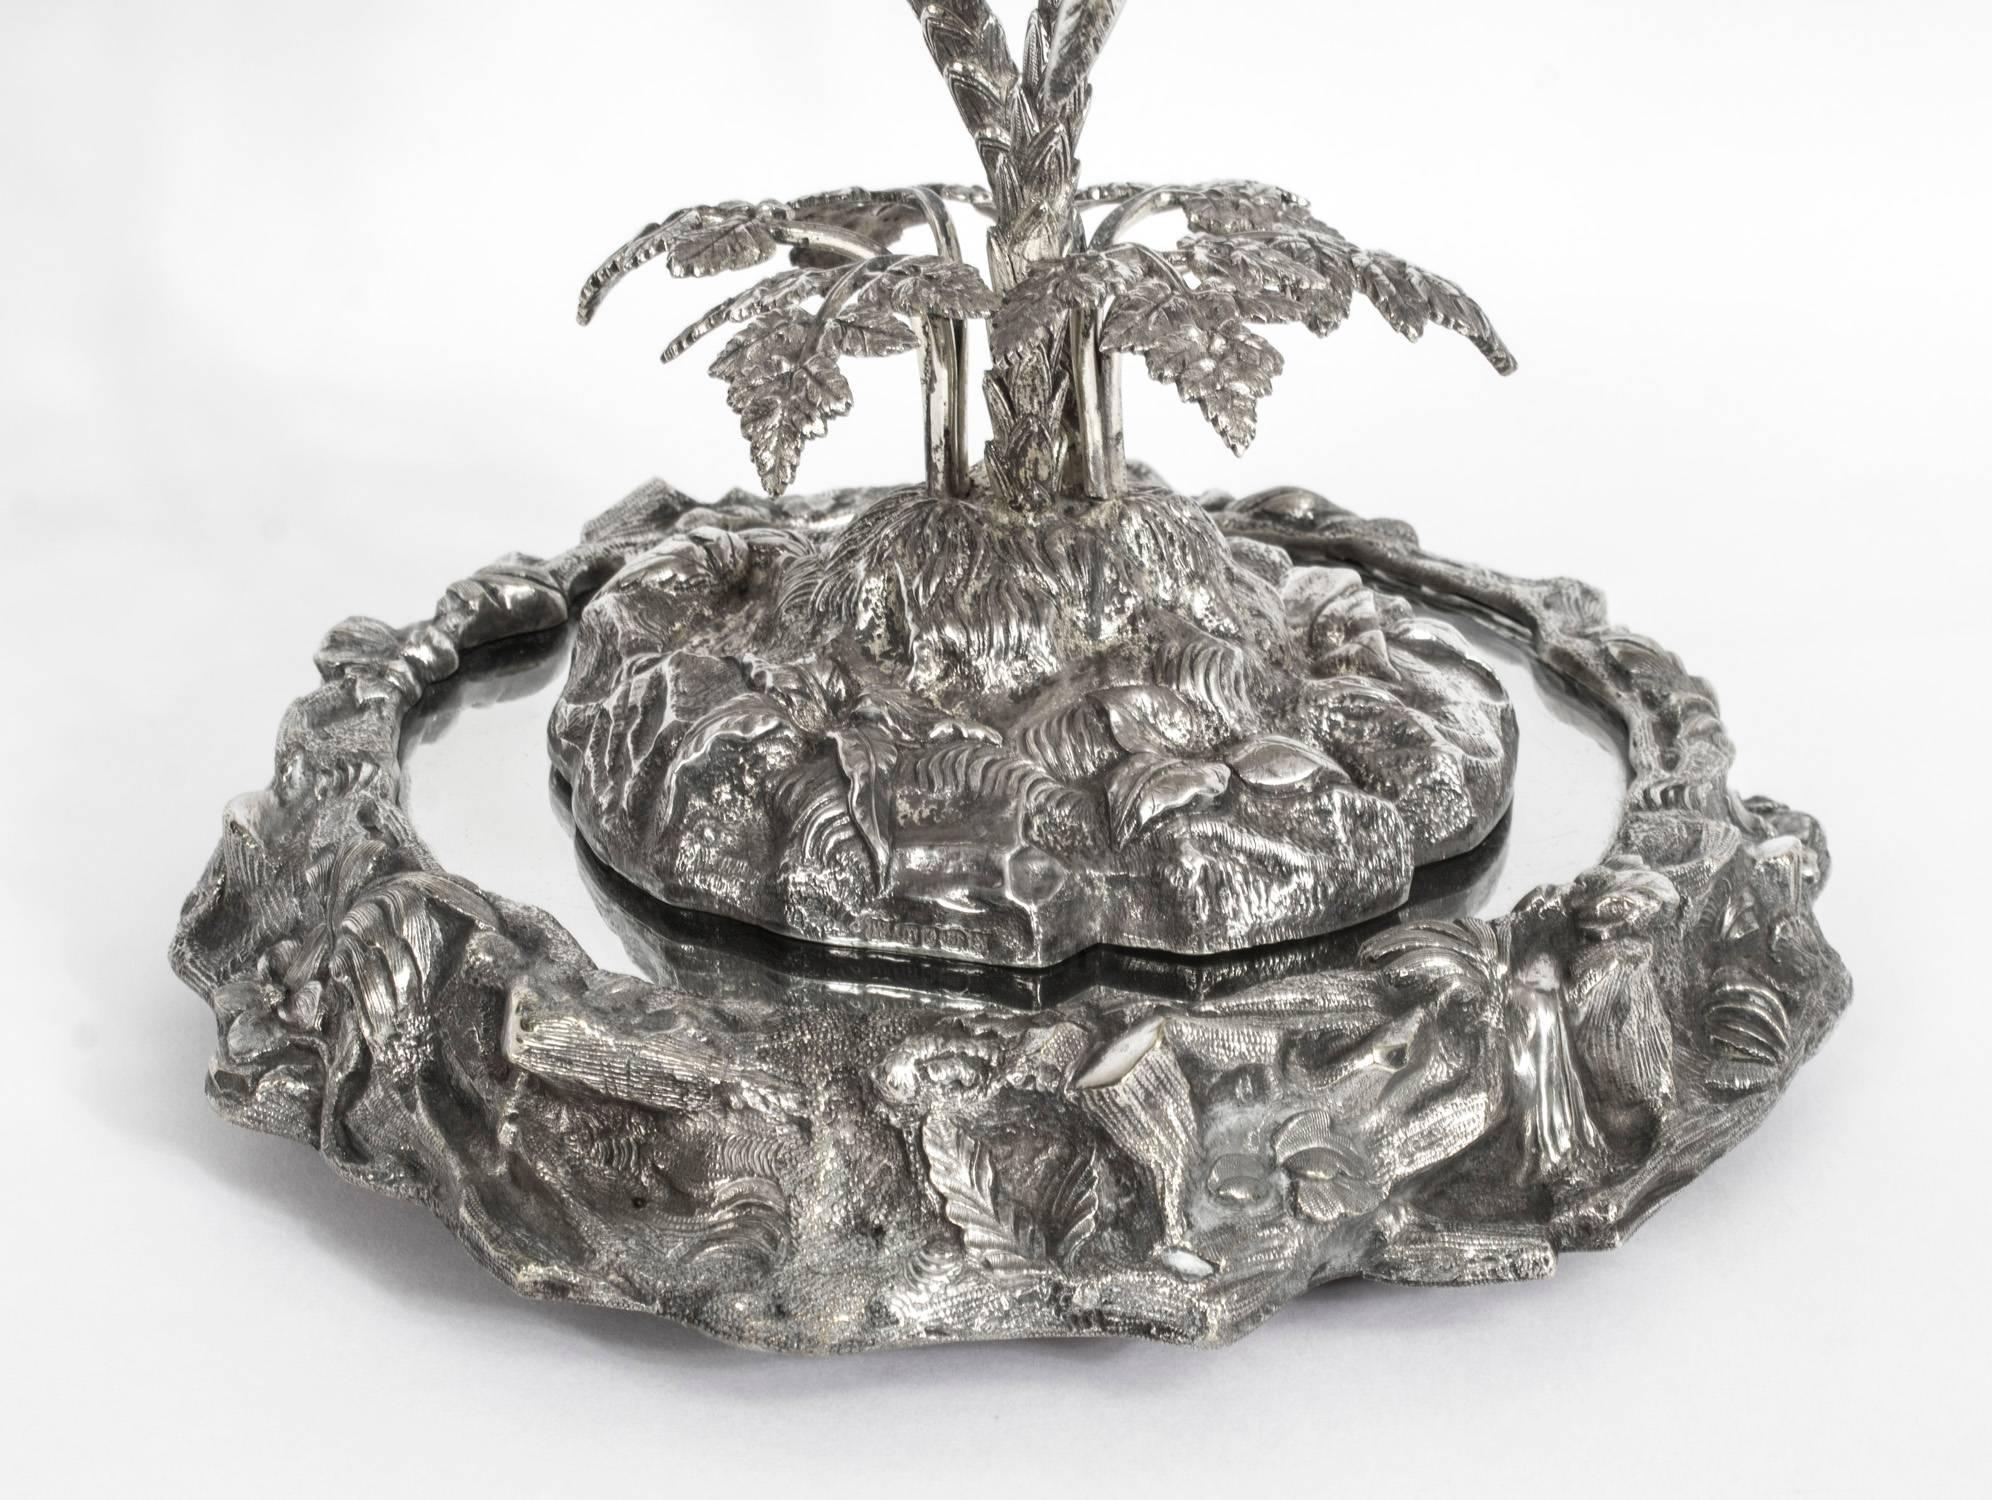 Antique Victorian Silver Plated Palm Tree Centrepiece Mirrored Base, circa 1860 2